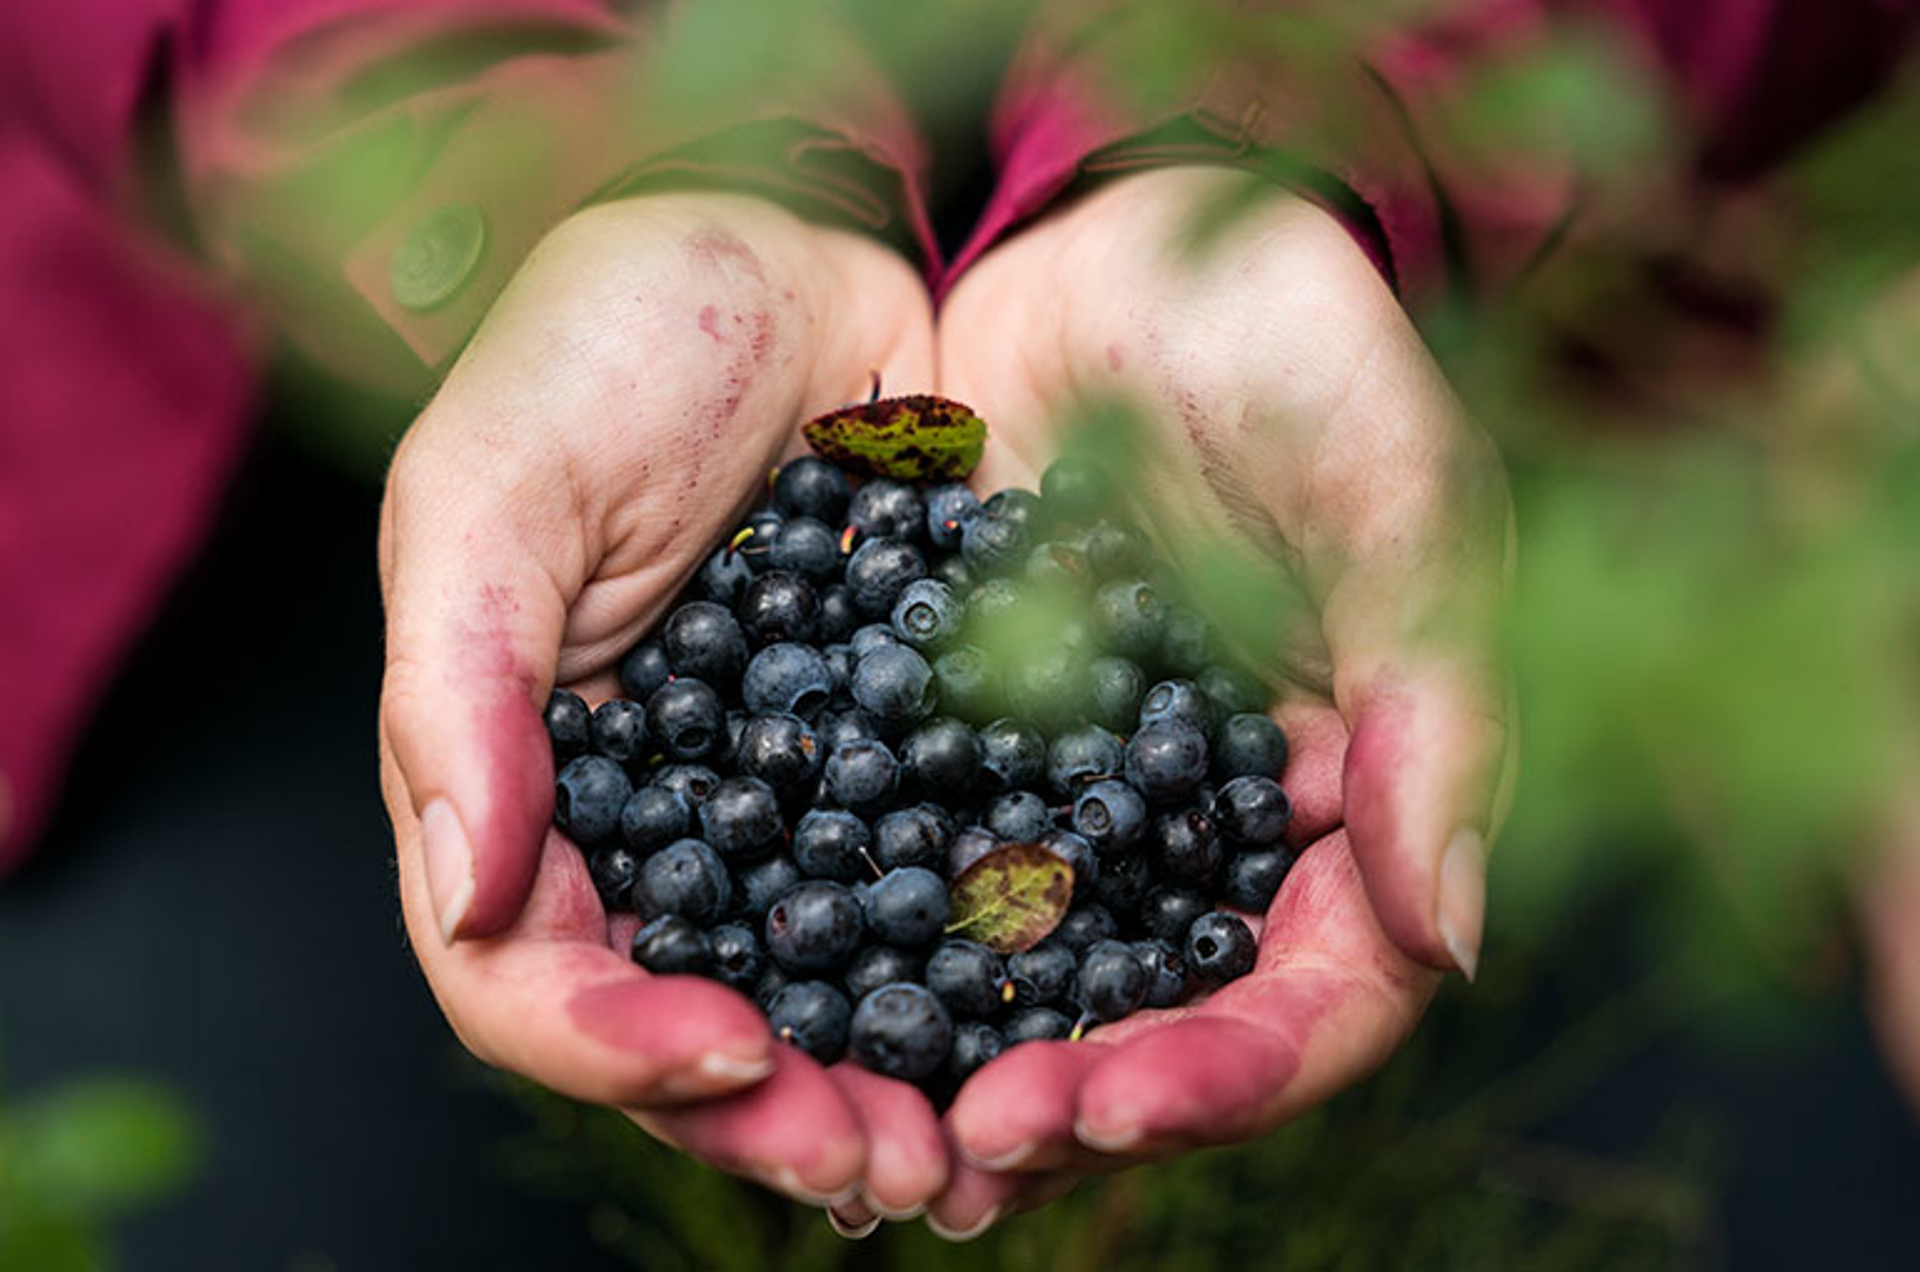 Hands holding fresh picked blueberries